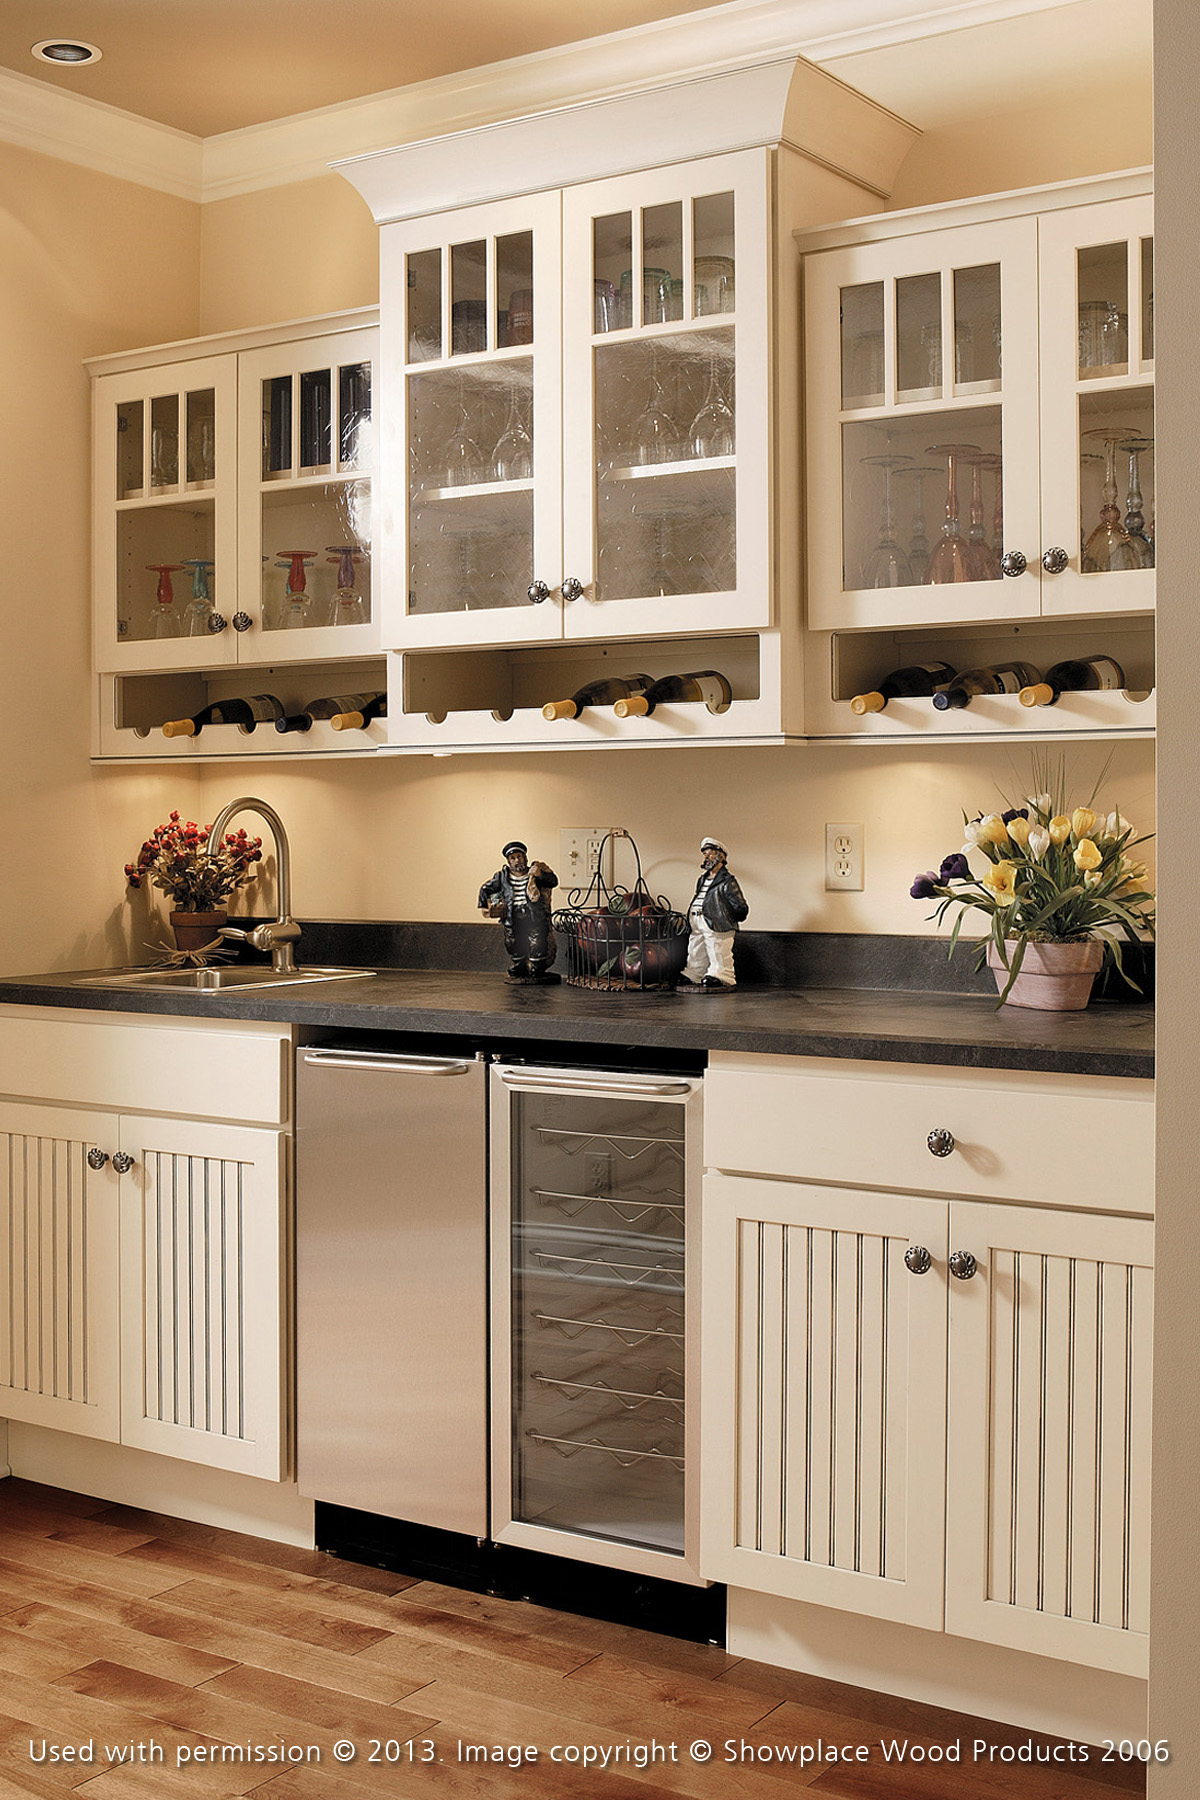 Cabinet Refacing Gallery Dreammaker, Kitchen Cabinet Refacing Pittsburgh